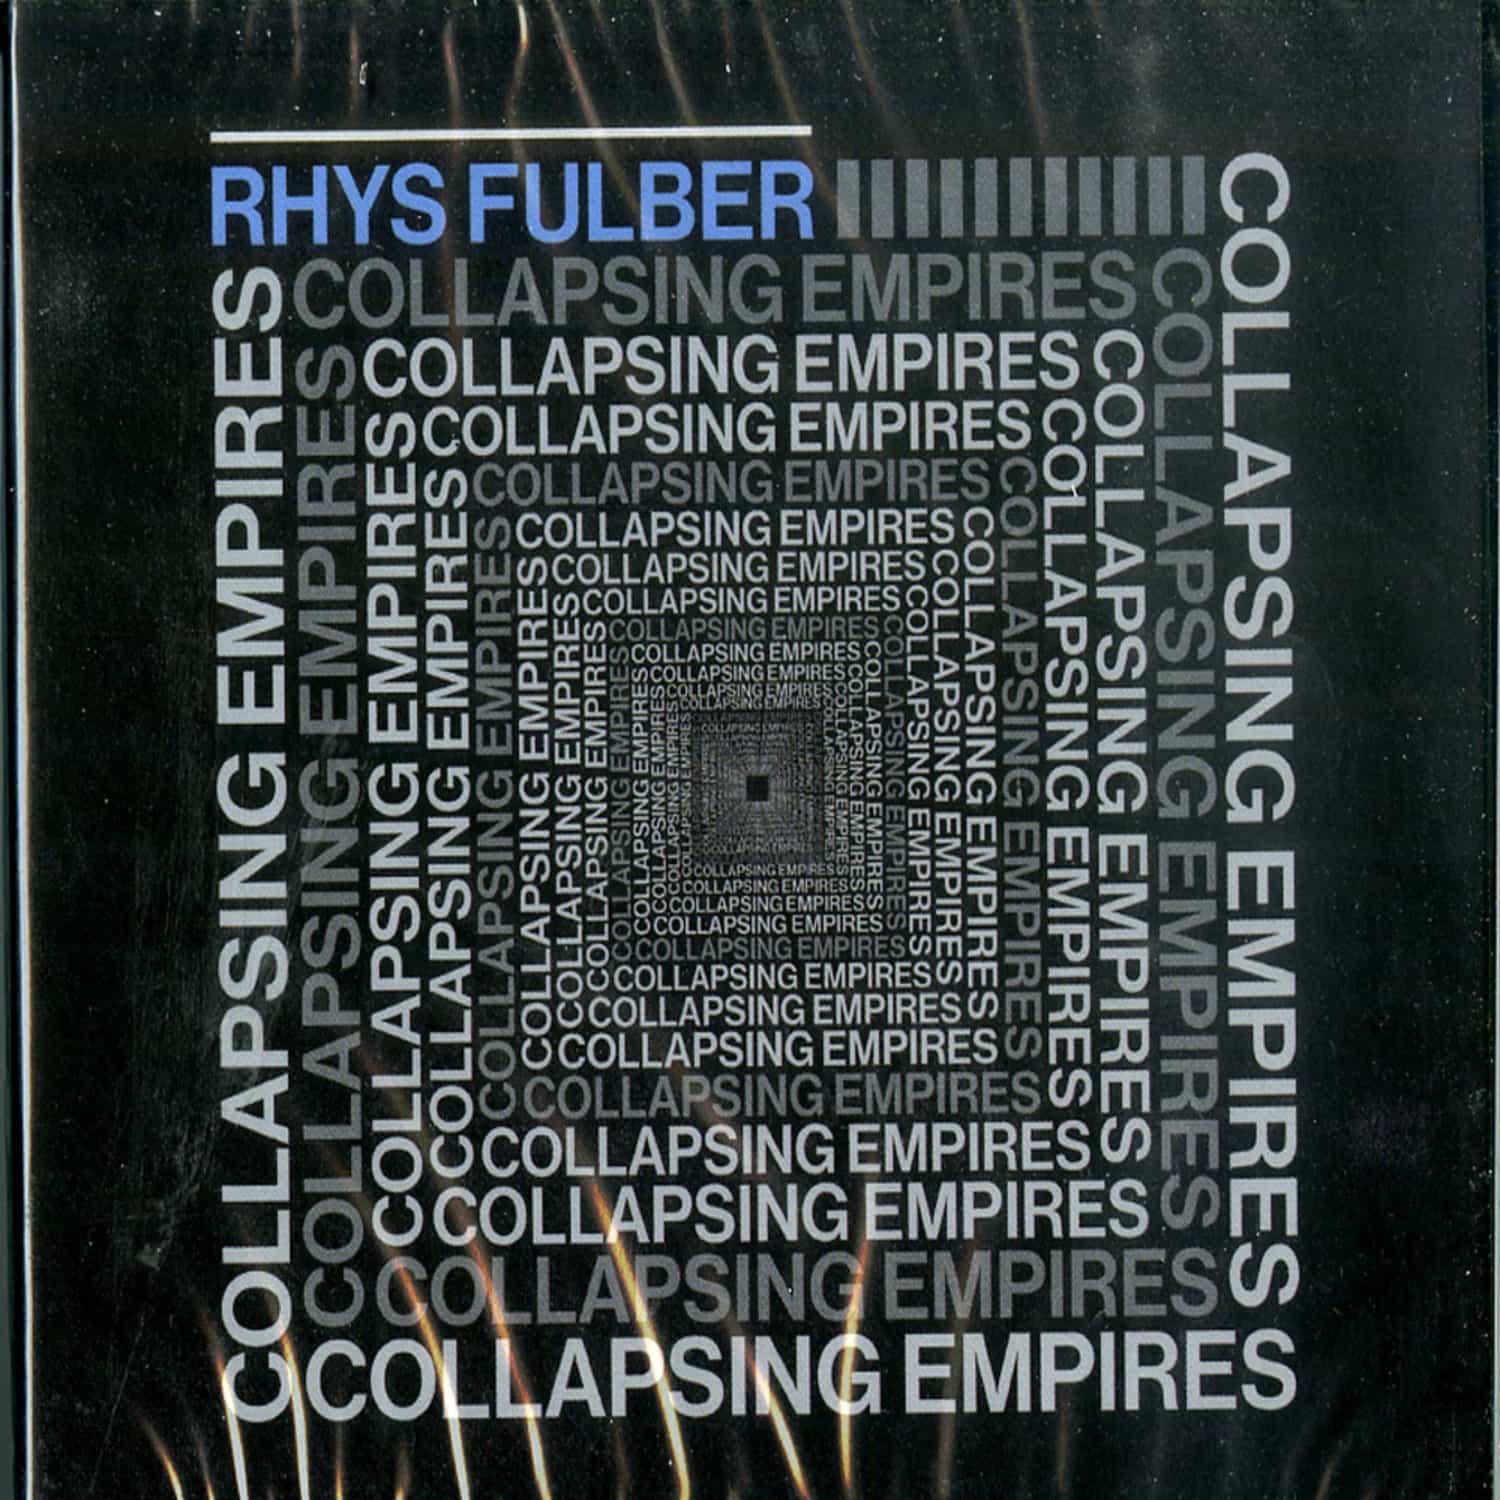 Rhys Fulber - COLLAPSING EMPIRES 